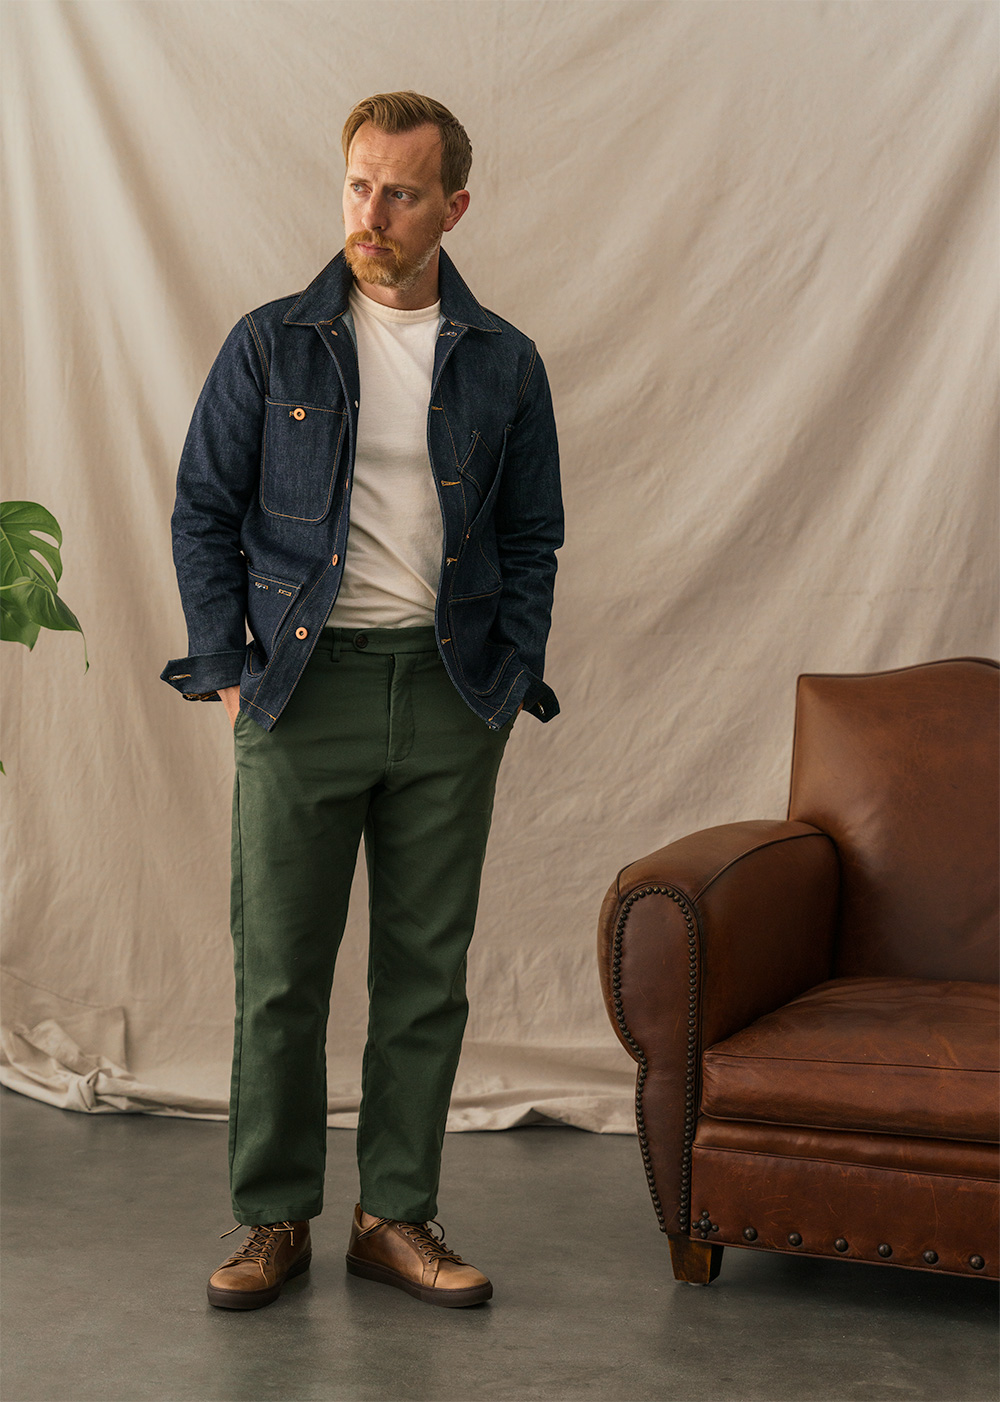 men's outfit with full cut trousers with sneakers and chore coat